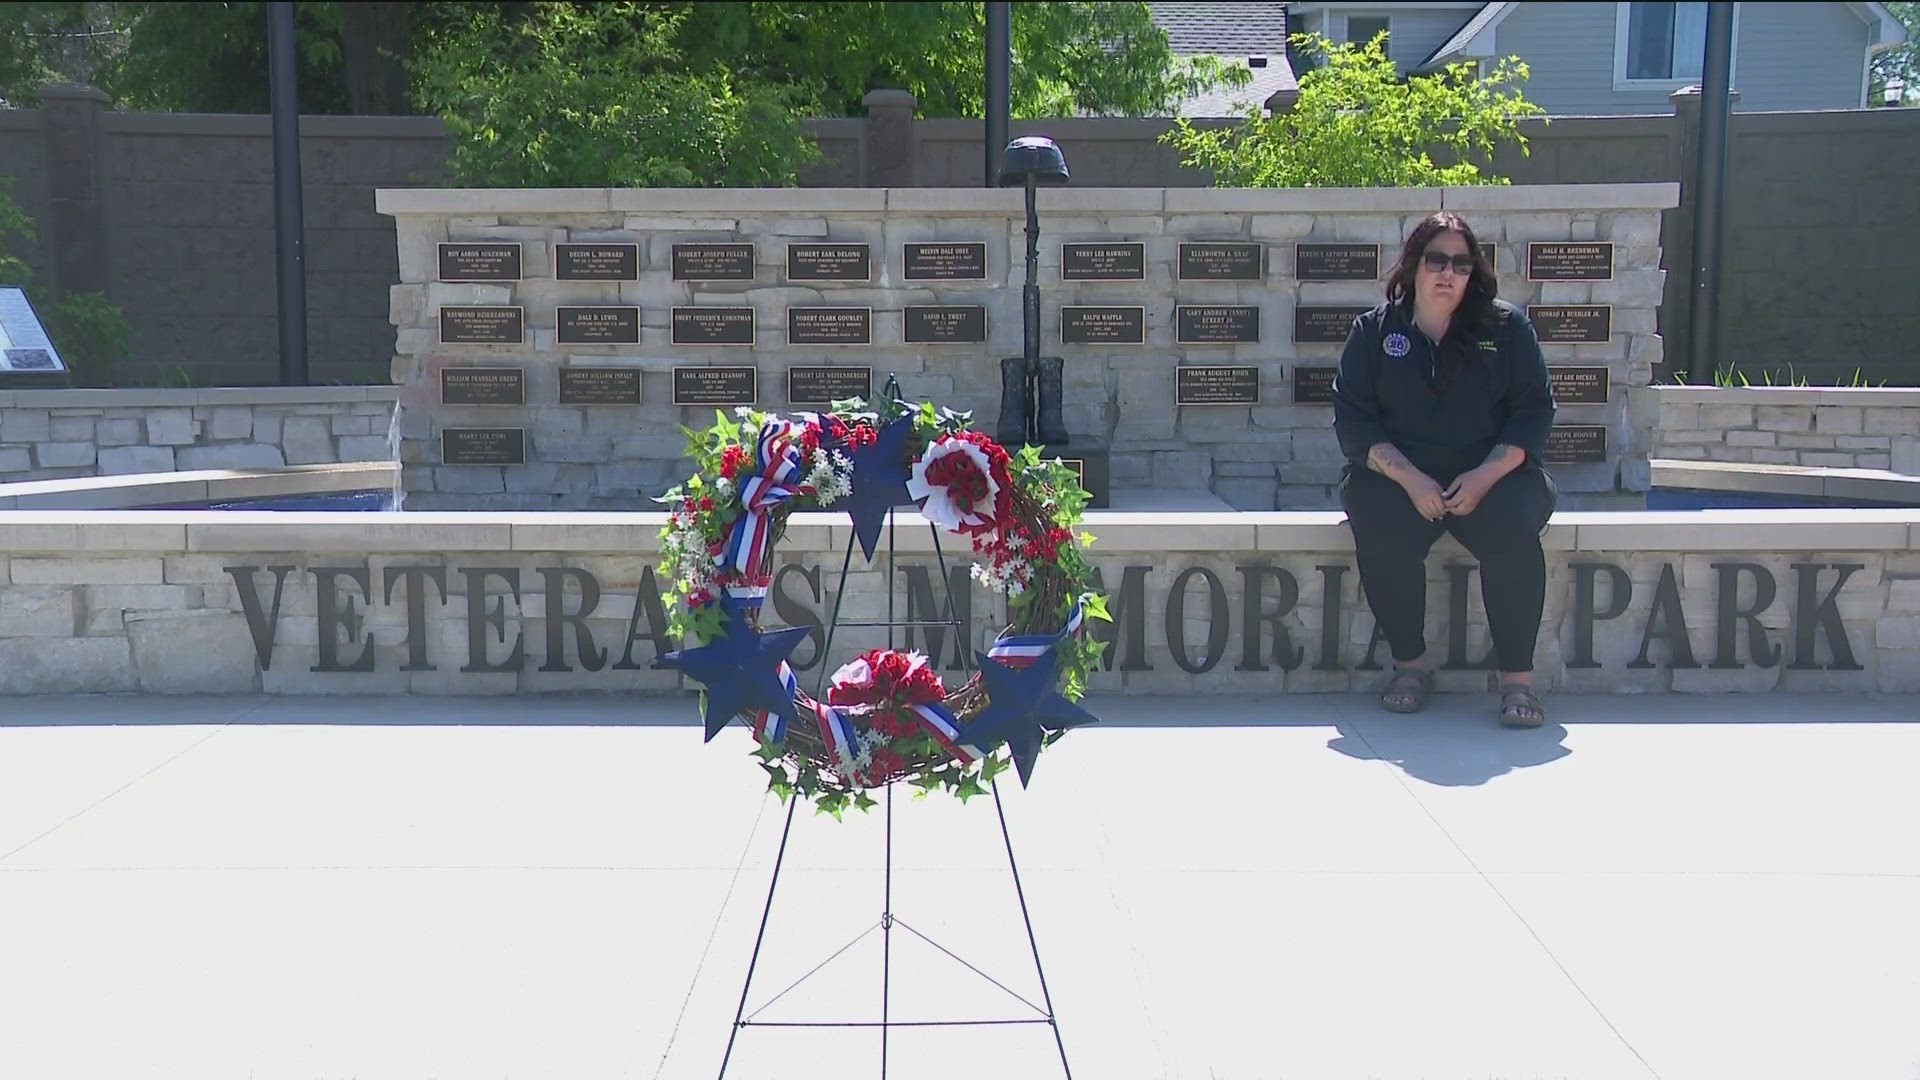 Tiffany Eckert says her first real Memorial Day came not long after her husband Andy was killed while serving in Iraq. Each year is an emotional one for her.